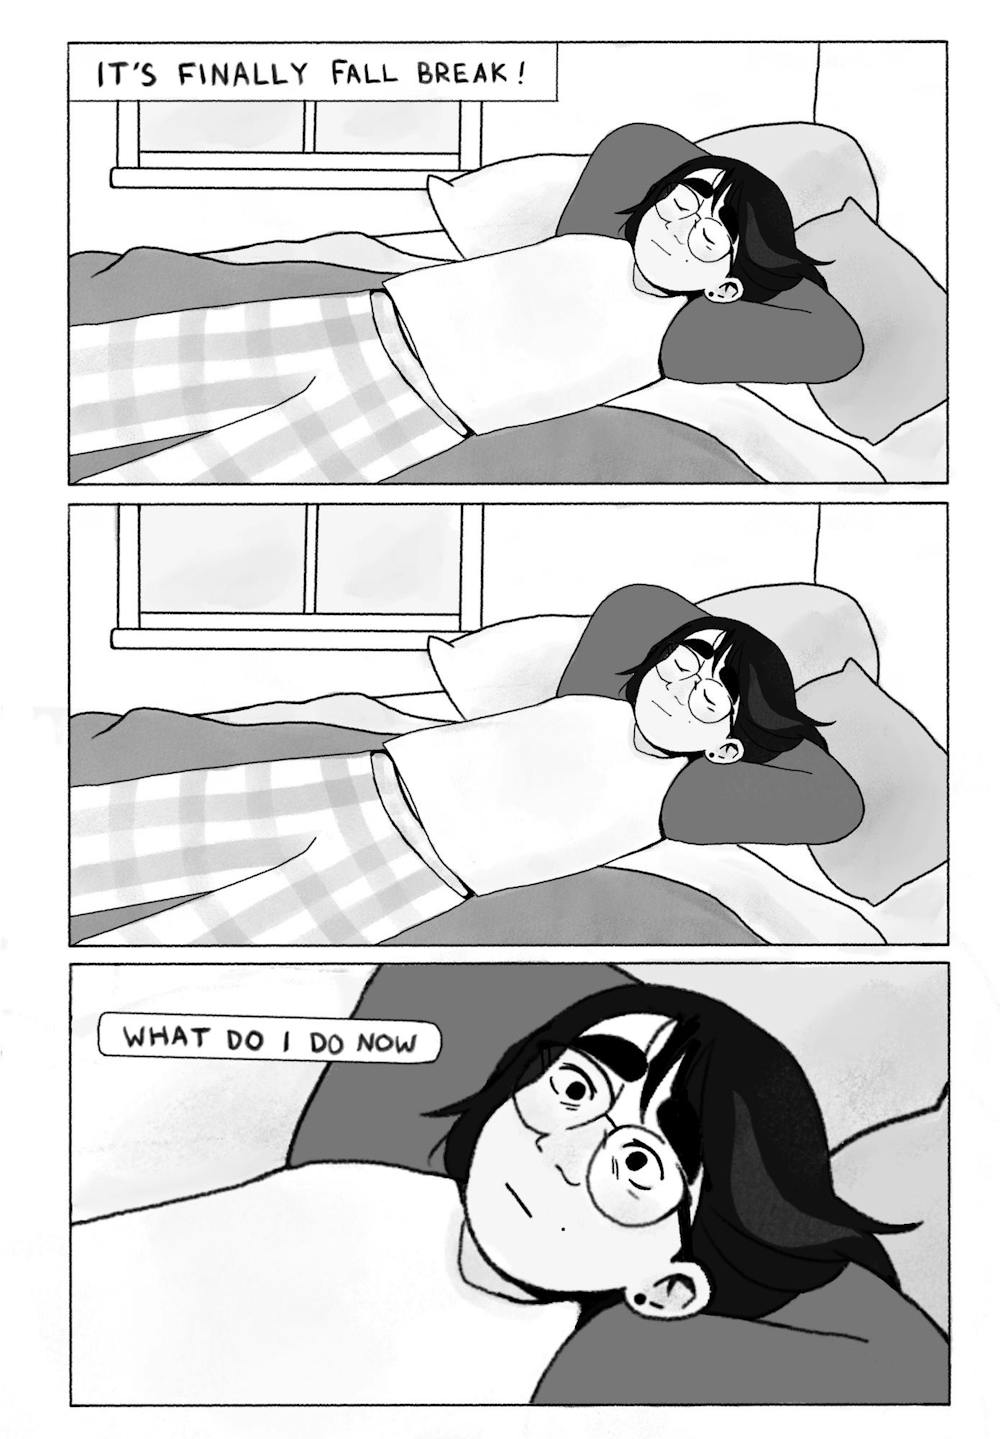 In first panel girl lays on their bed at home in pajamas, reclining with eyes closed. Text reads “It’s finally fall break”. First panel repeats without text. Third panel zooms in on girl who suddenly looks afraid or stressed. Text reads, “What do I do now”.